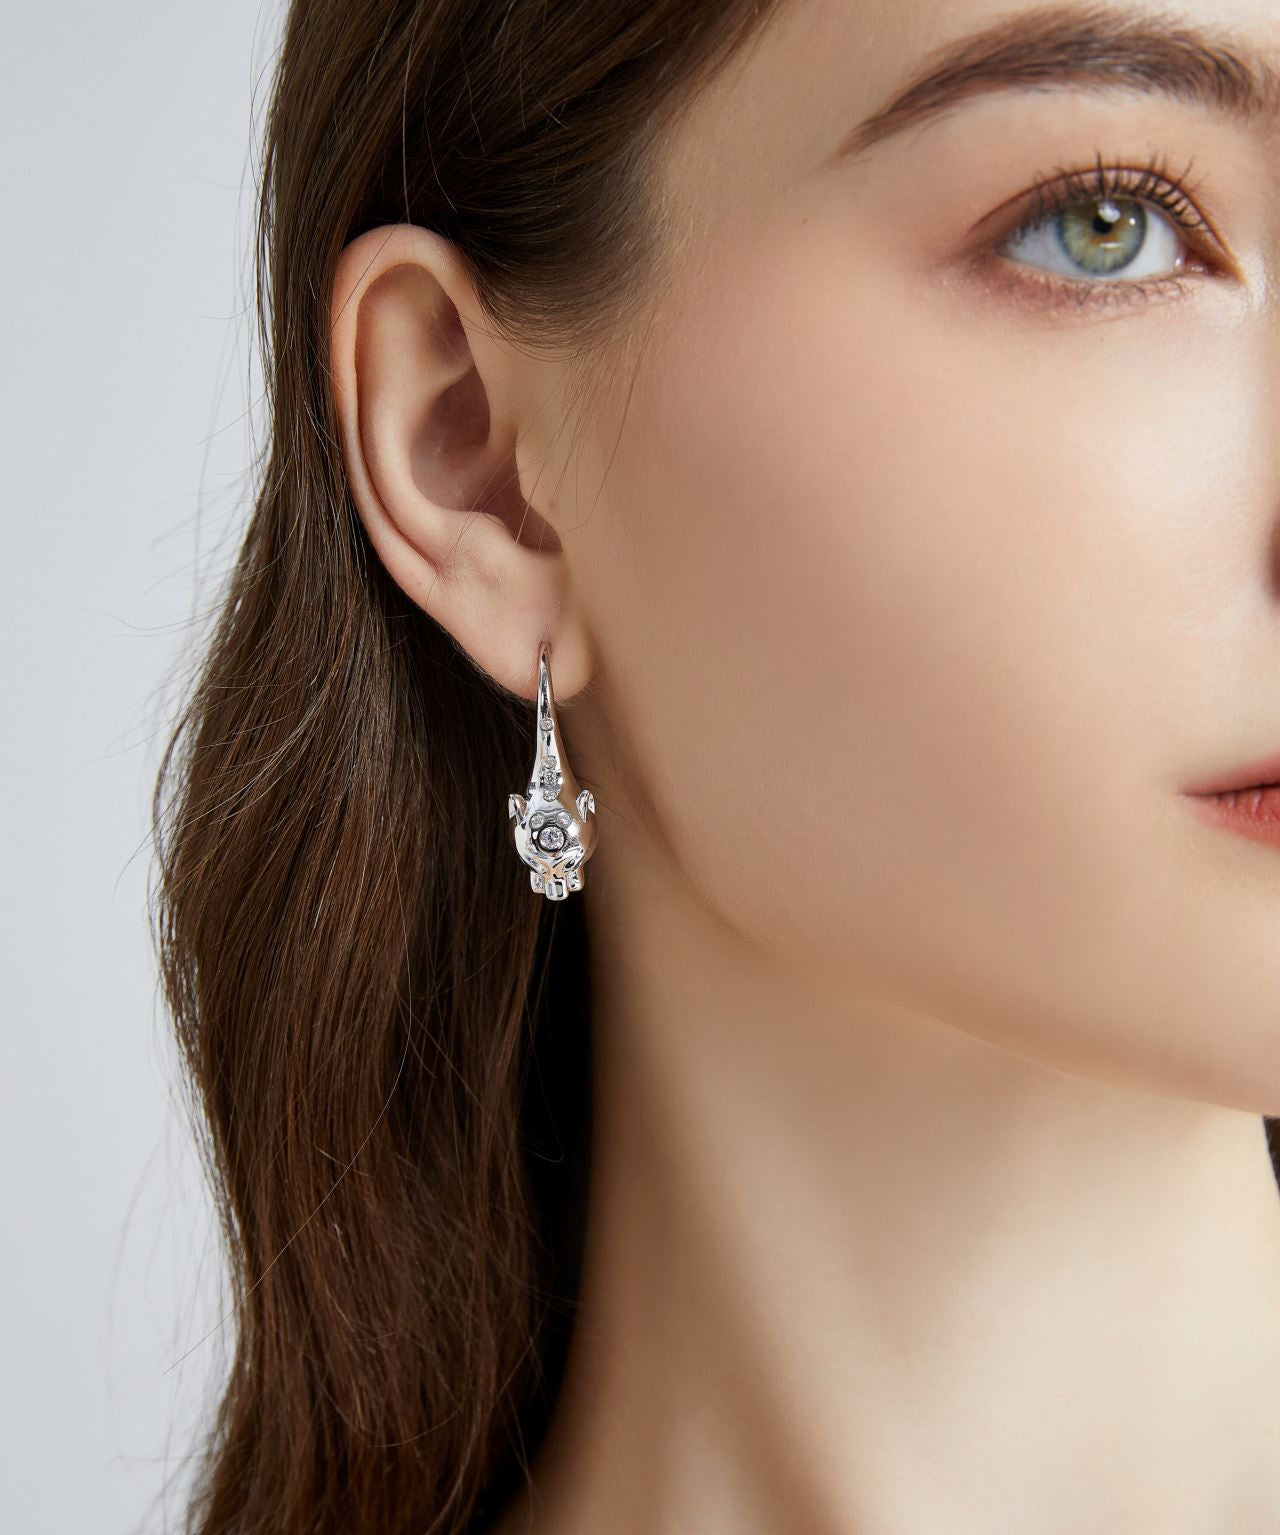 White Panther Earrings